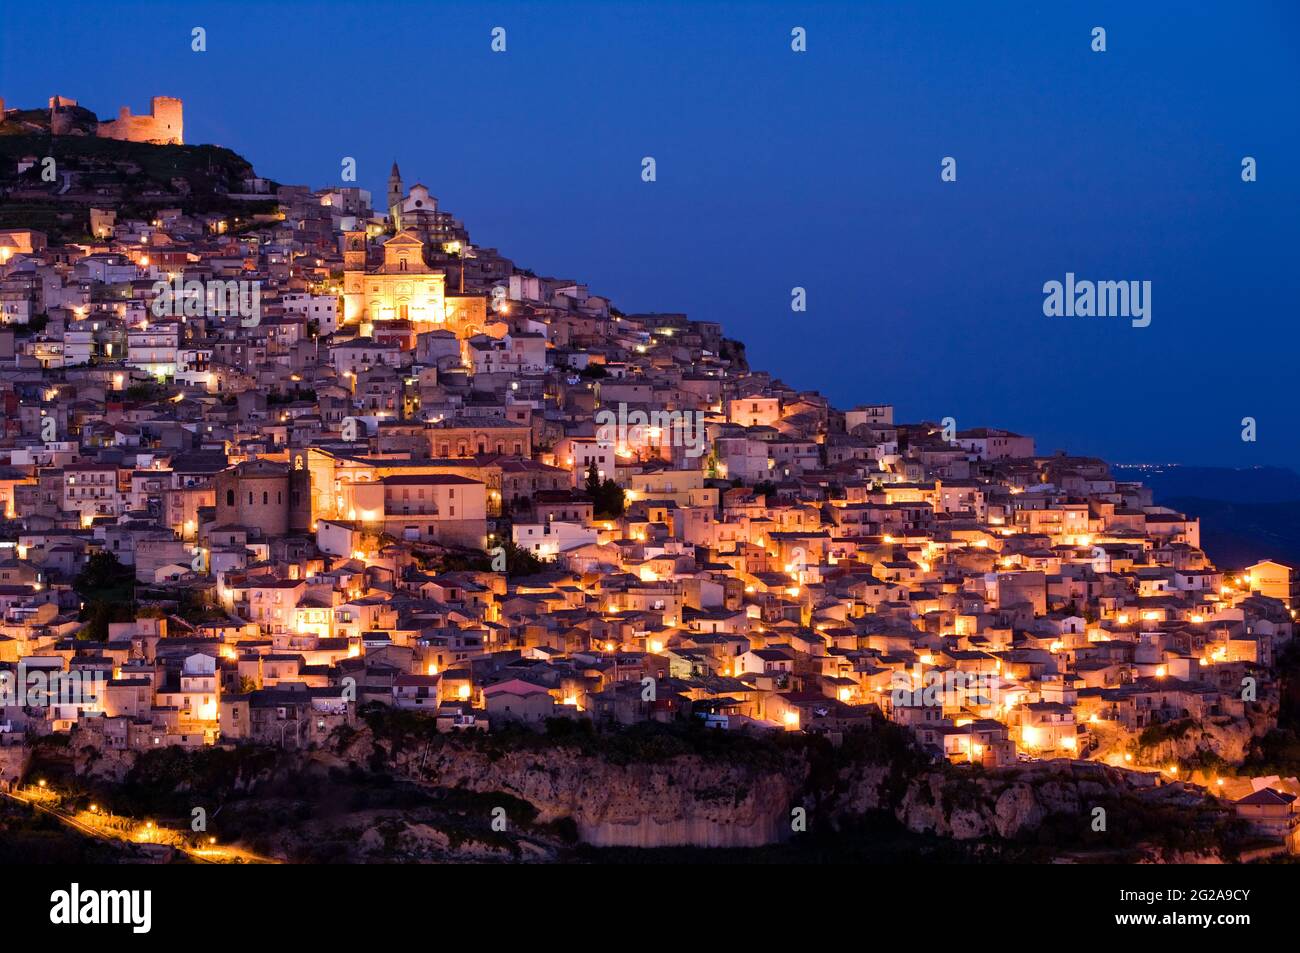 view by night of dwellings and the church of Santa Margherita in the city of Agira in Sicily Stock Photo